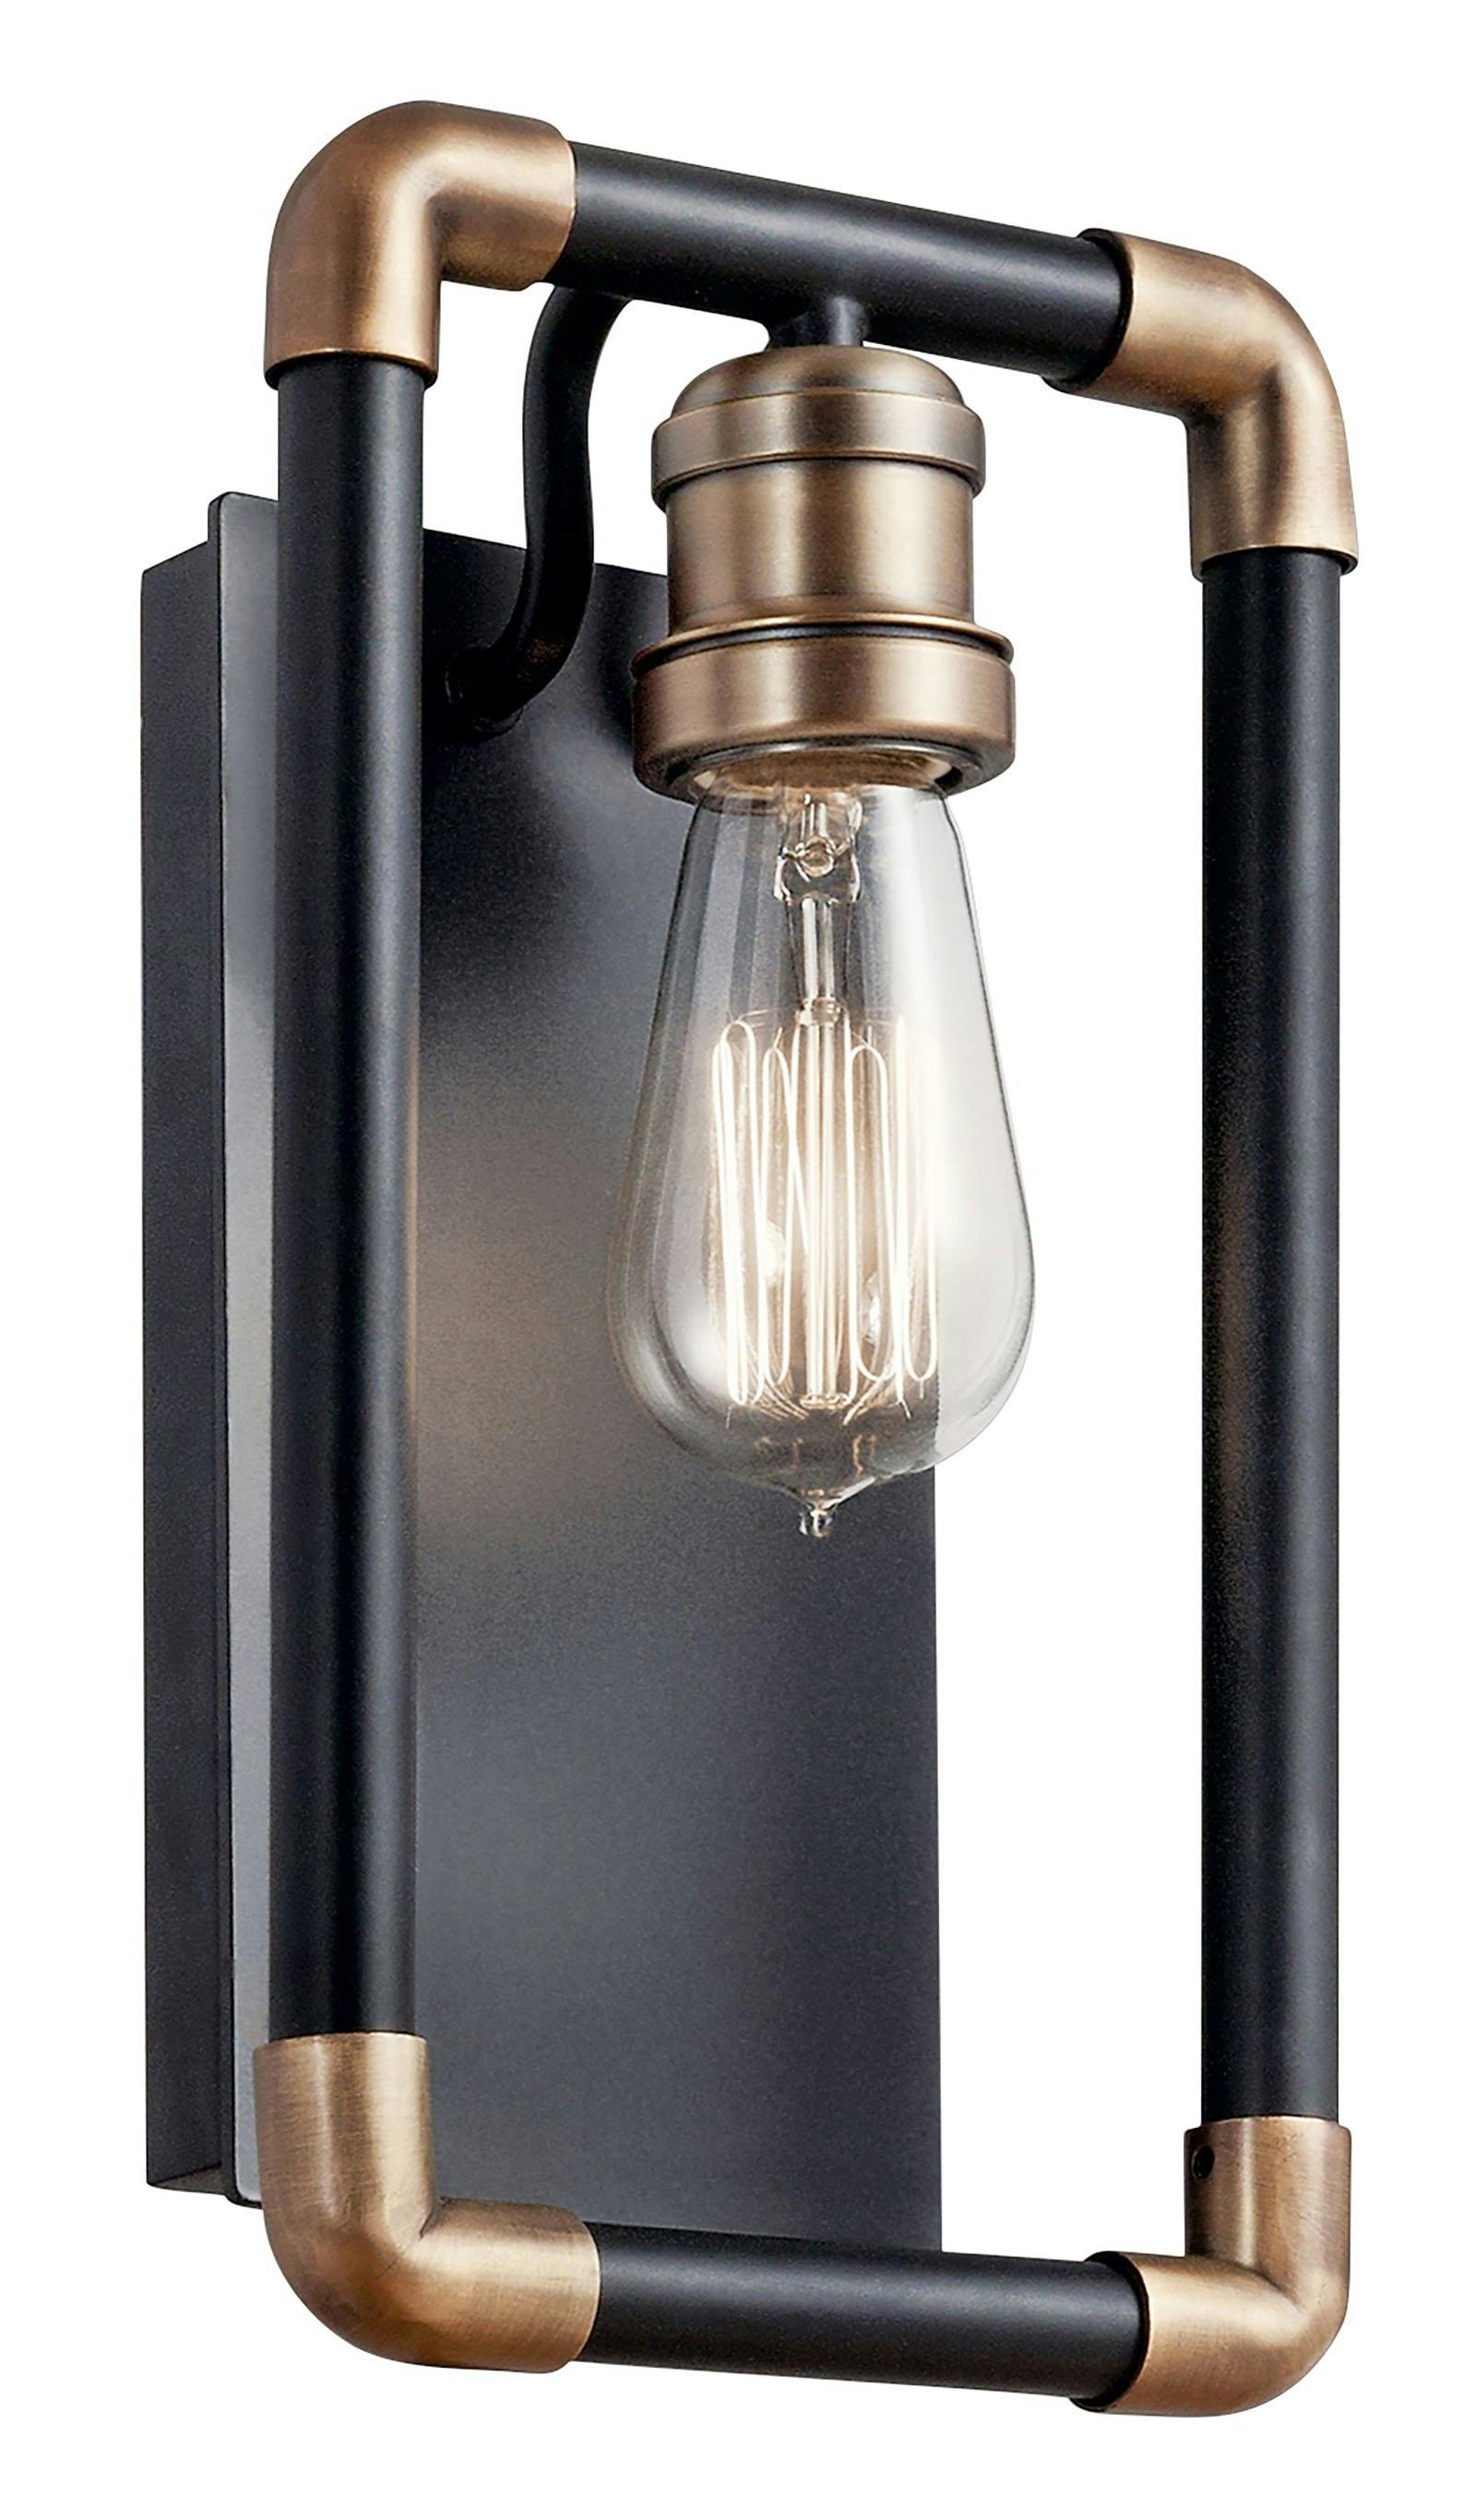 Imahn 1 Light Wall Sconce Black on a white background